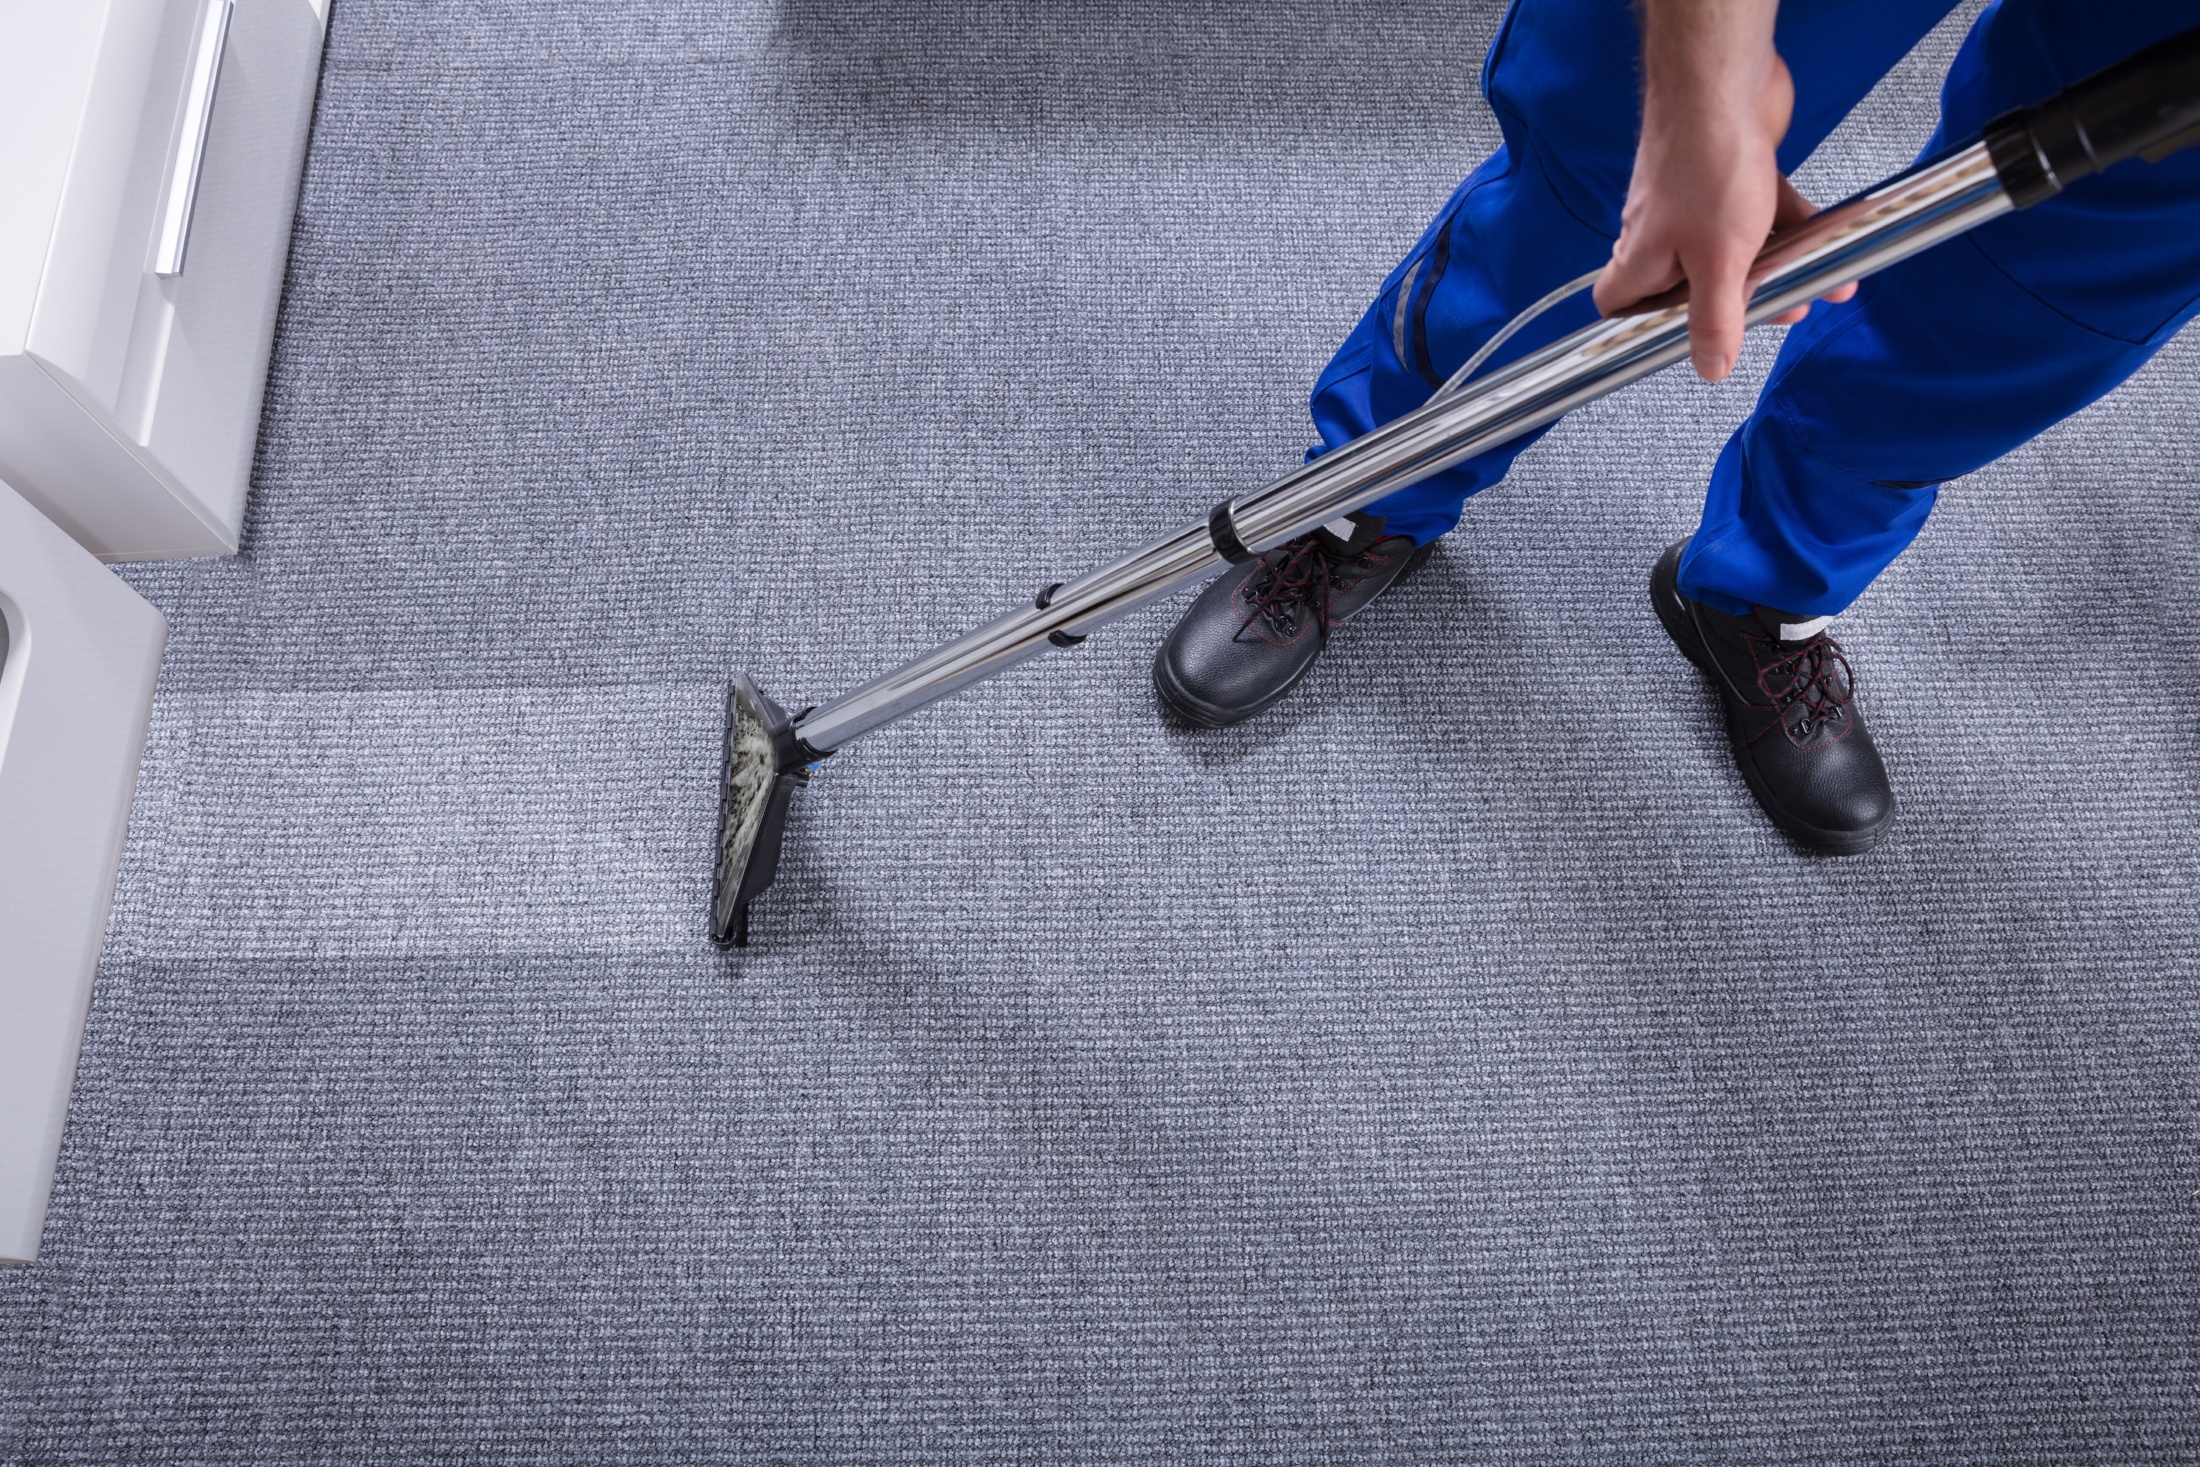 What You Need to Know about Carpet Cleaning, Upholstery and Blind Cleaning  Services